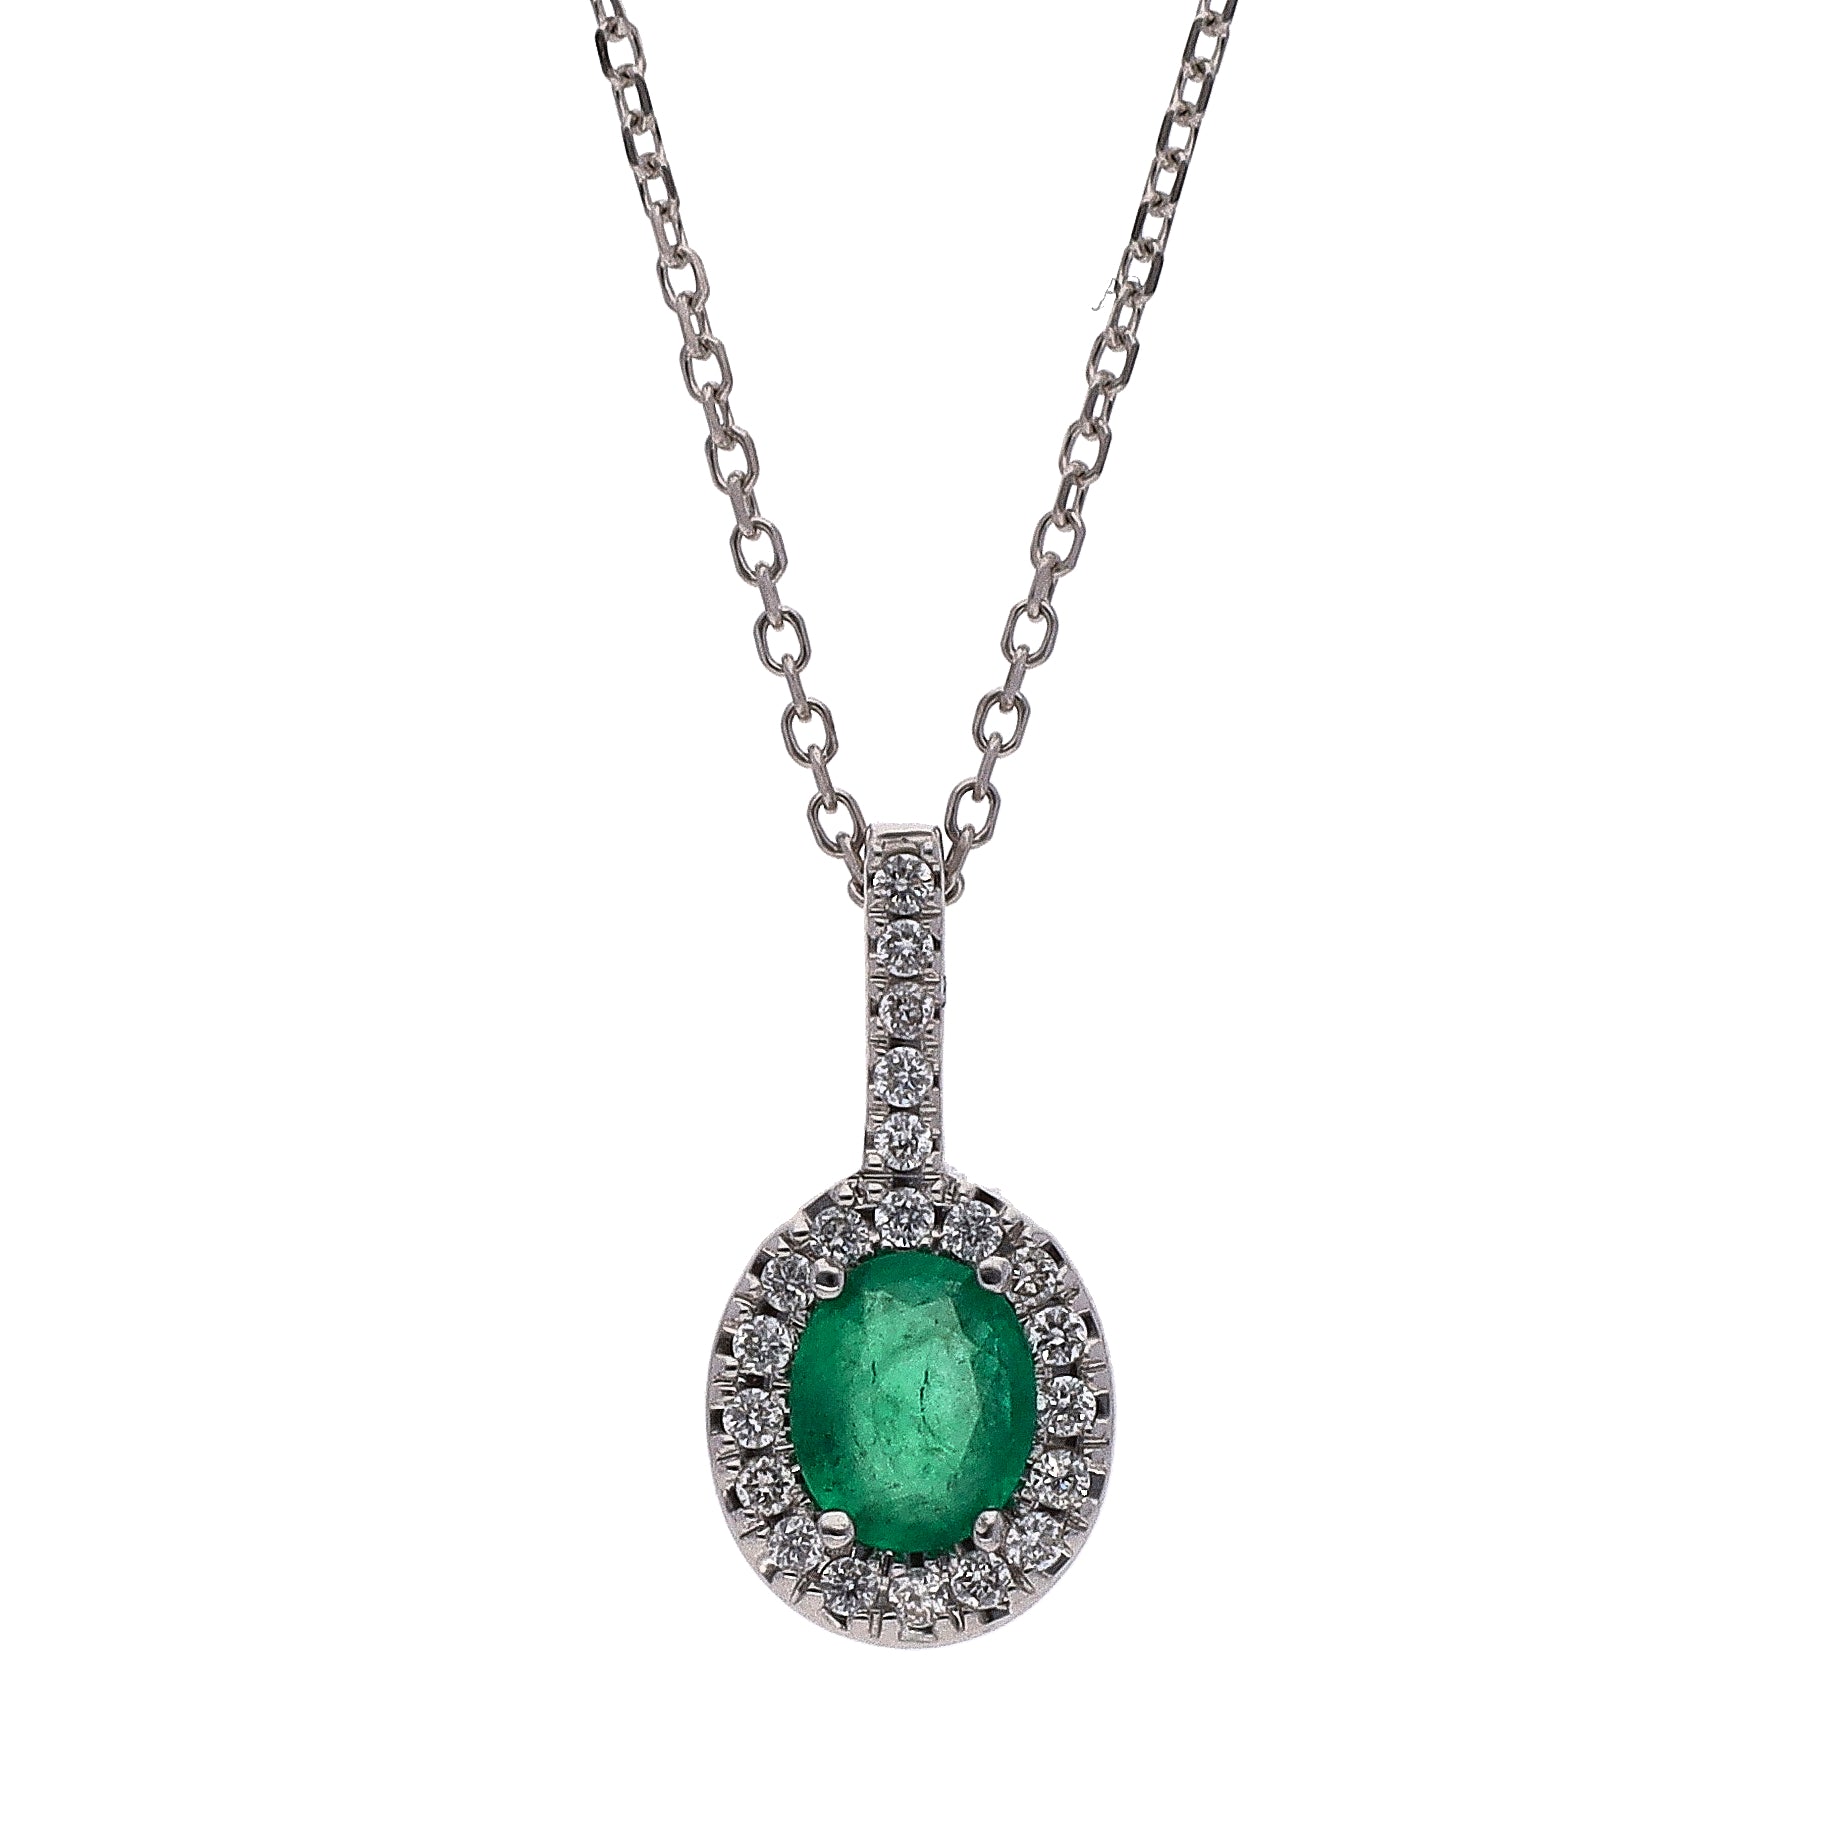 14K White Gold Oval Emerald and Diamond Pendant 16" Necklace